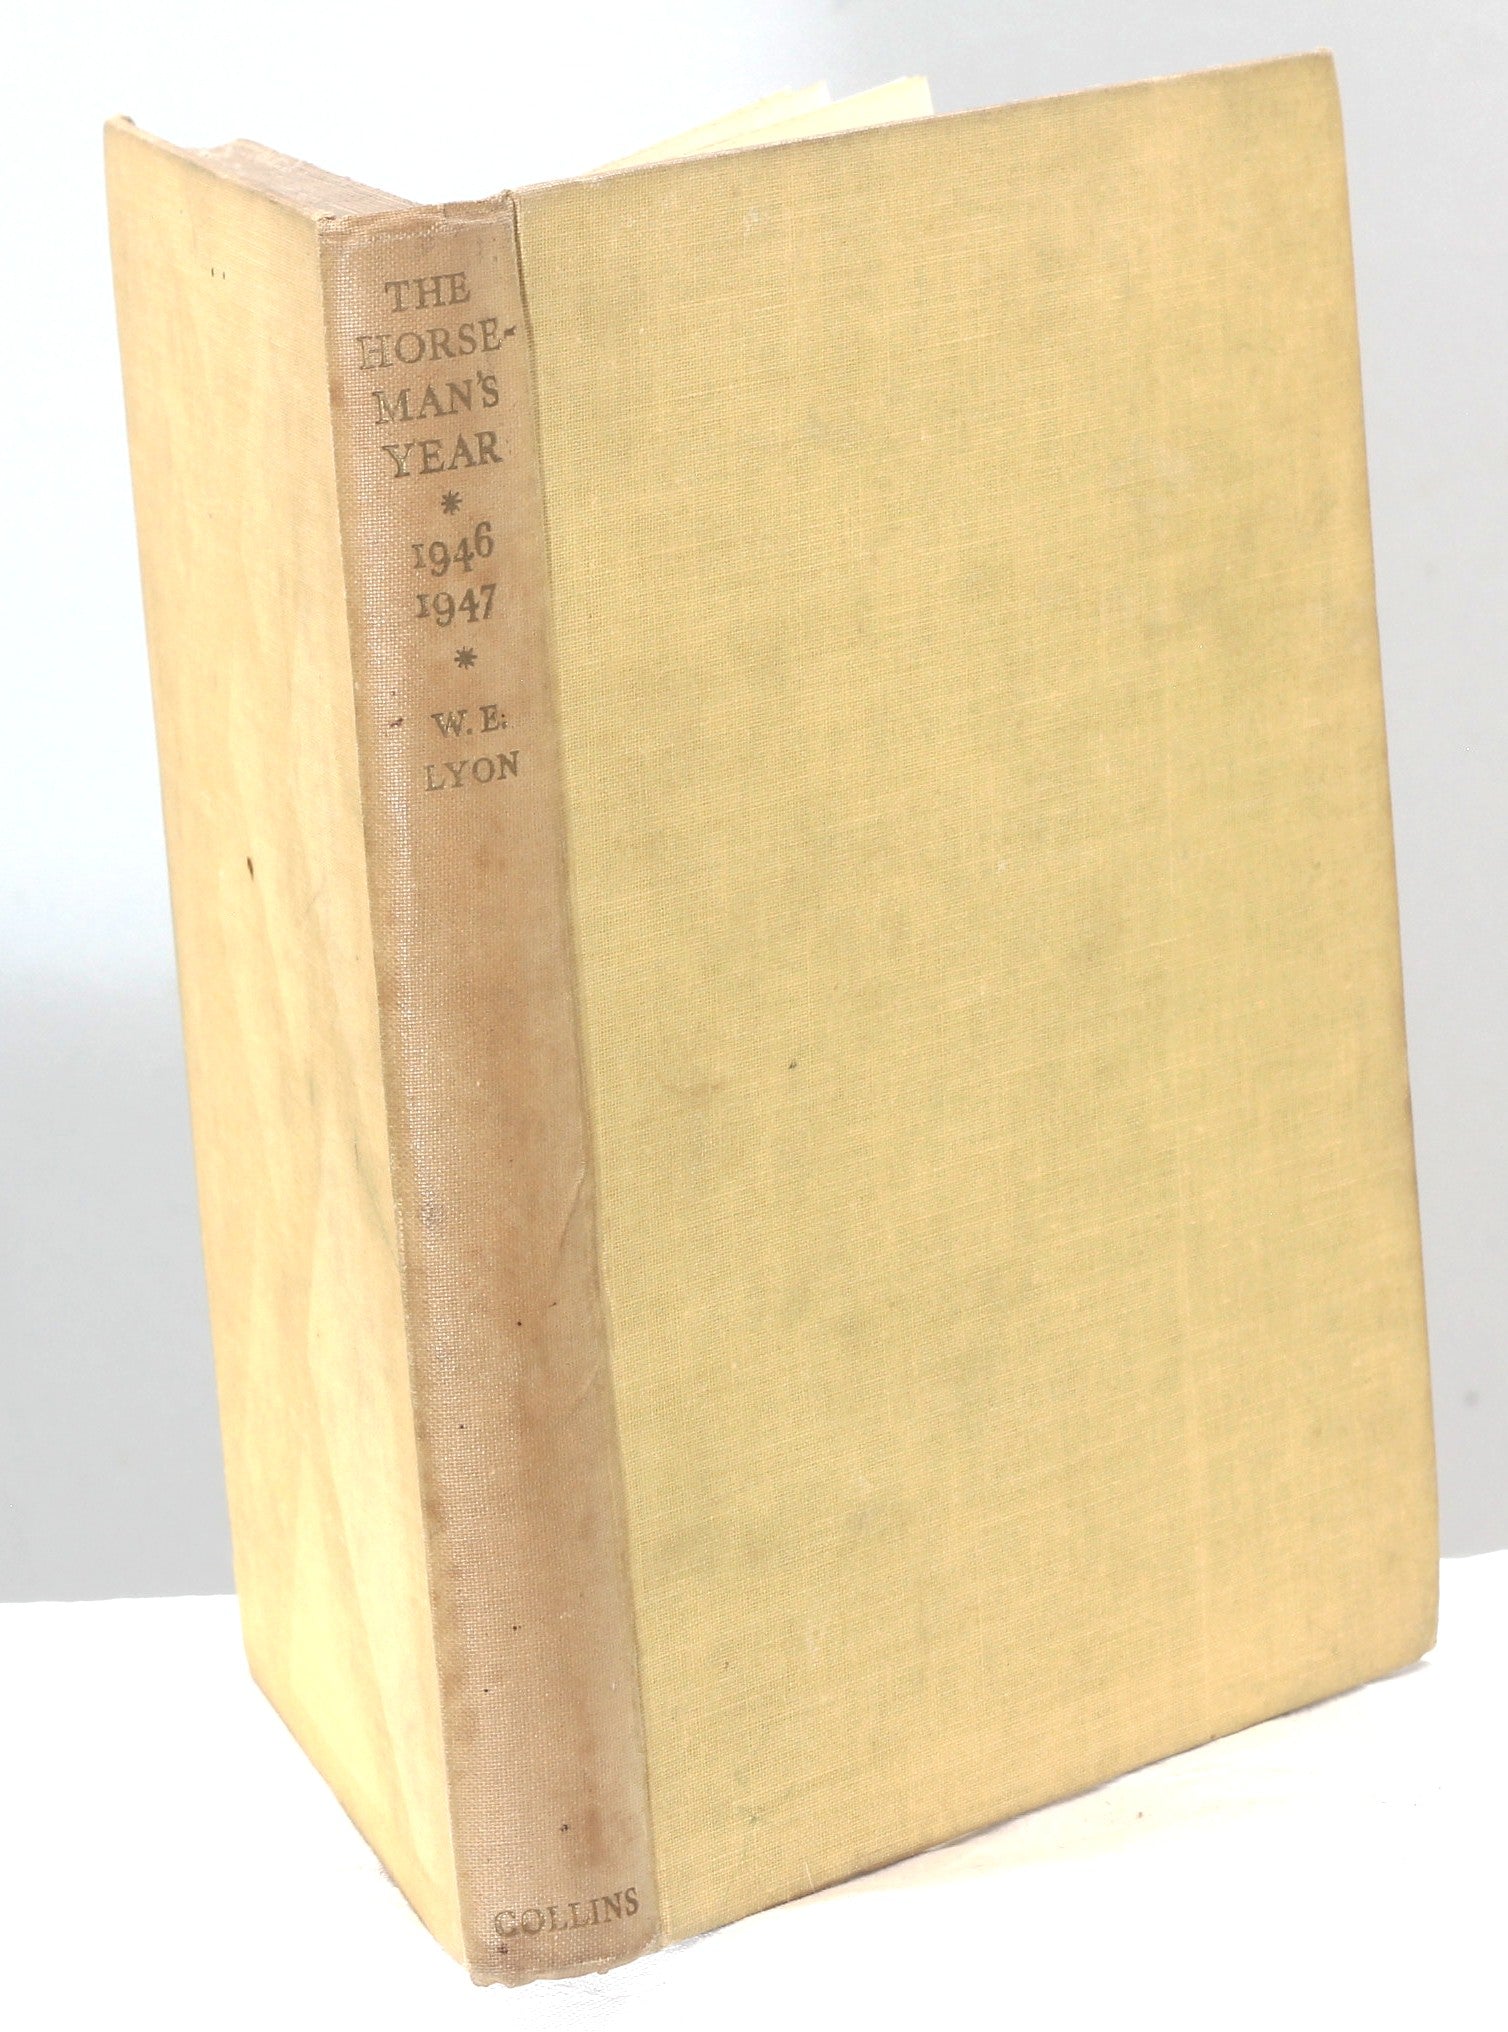 The Horseman's Year 1946-47, Edited by Lt.Col. W.E.Lyon, Signed copy